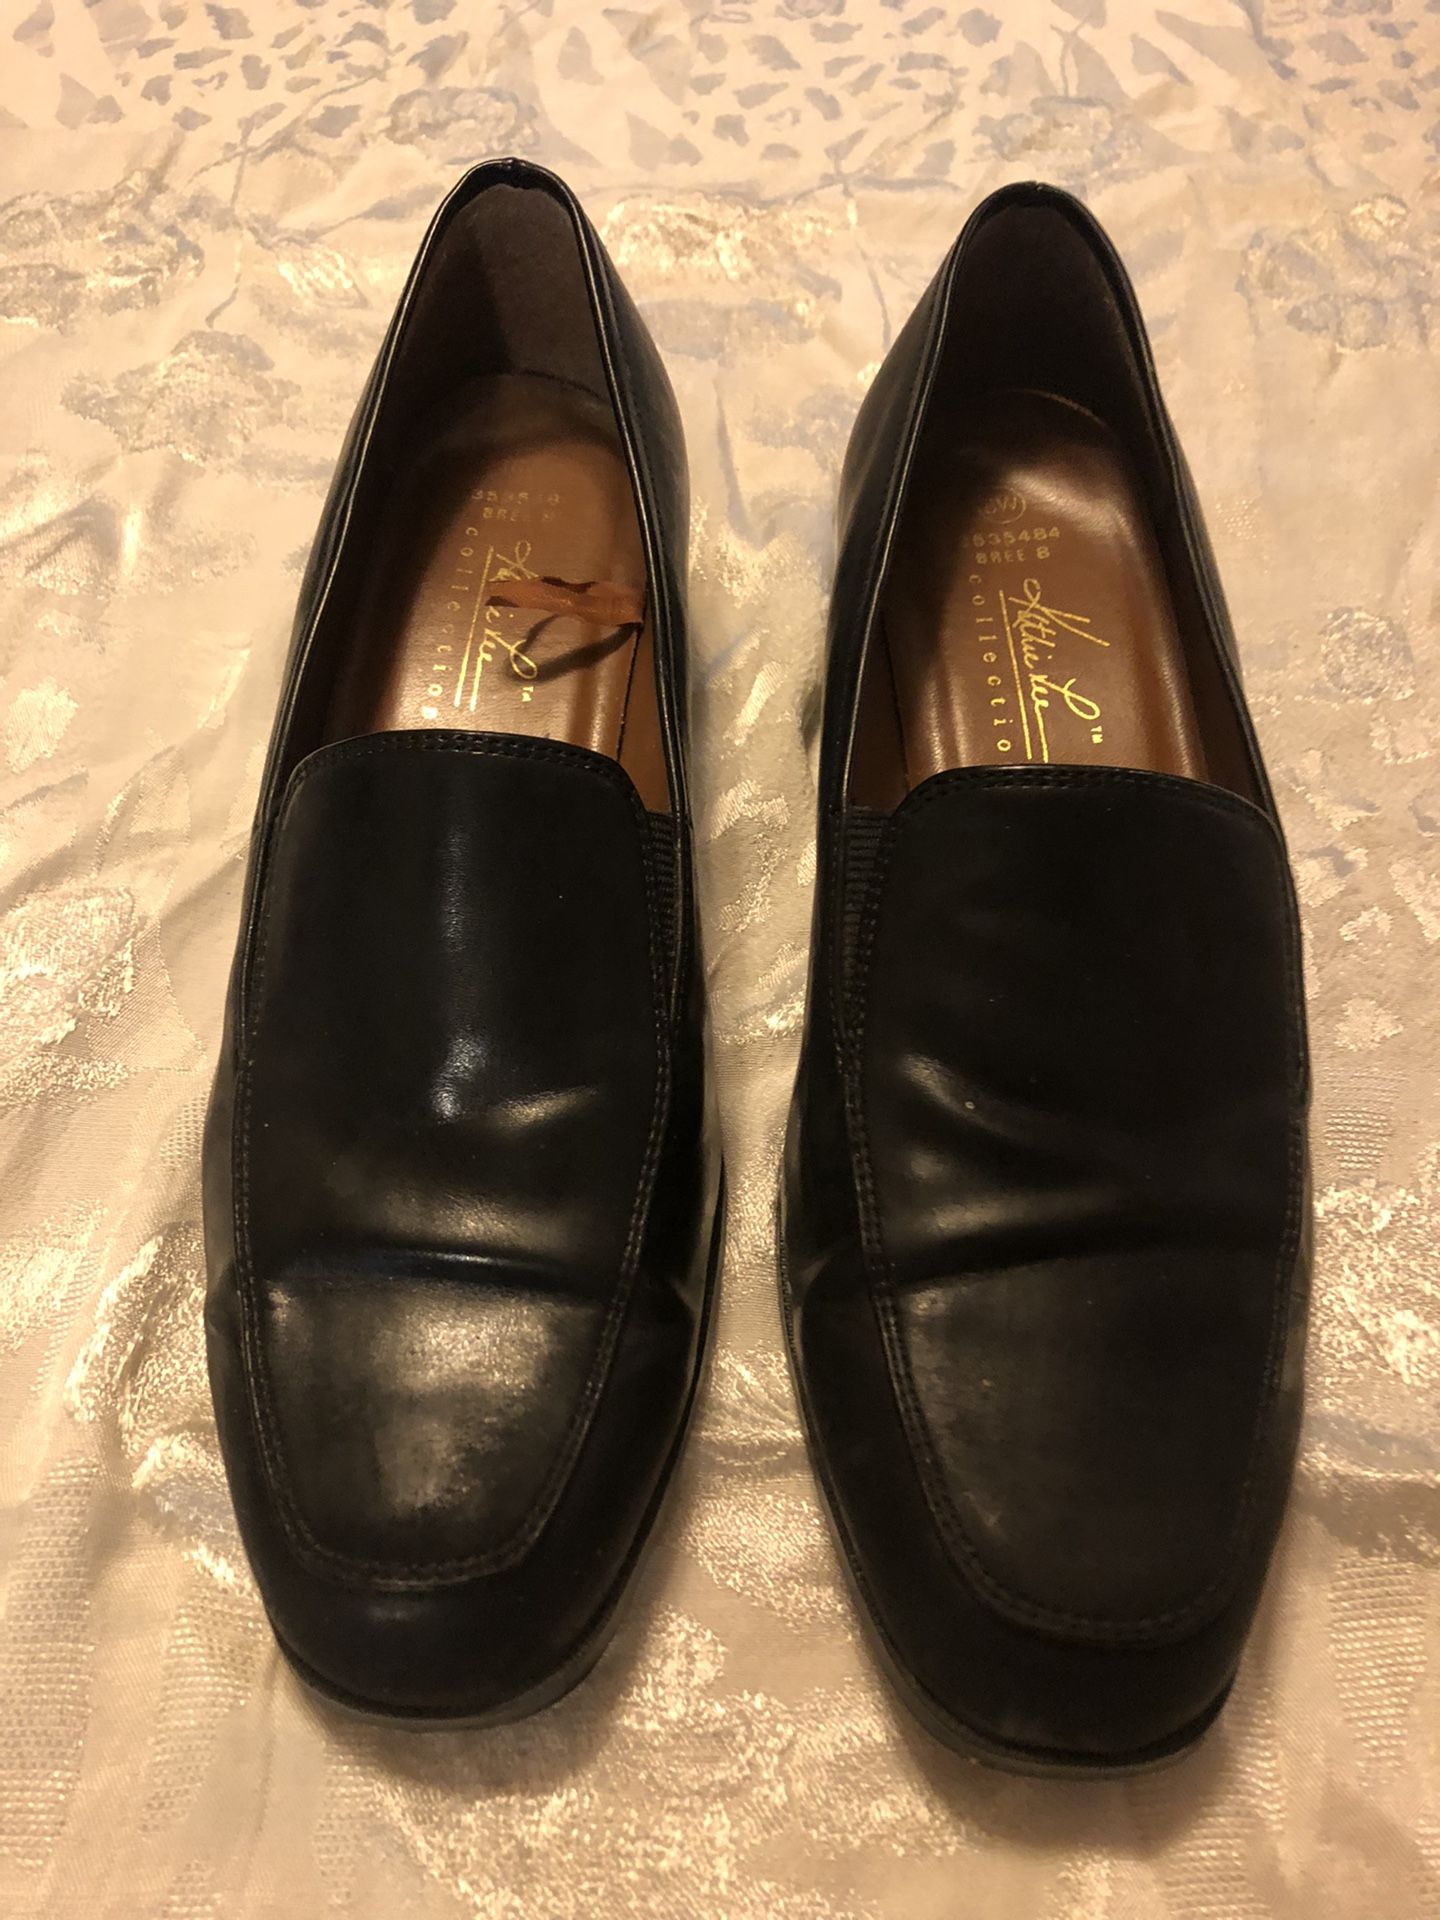 Womens Loafers